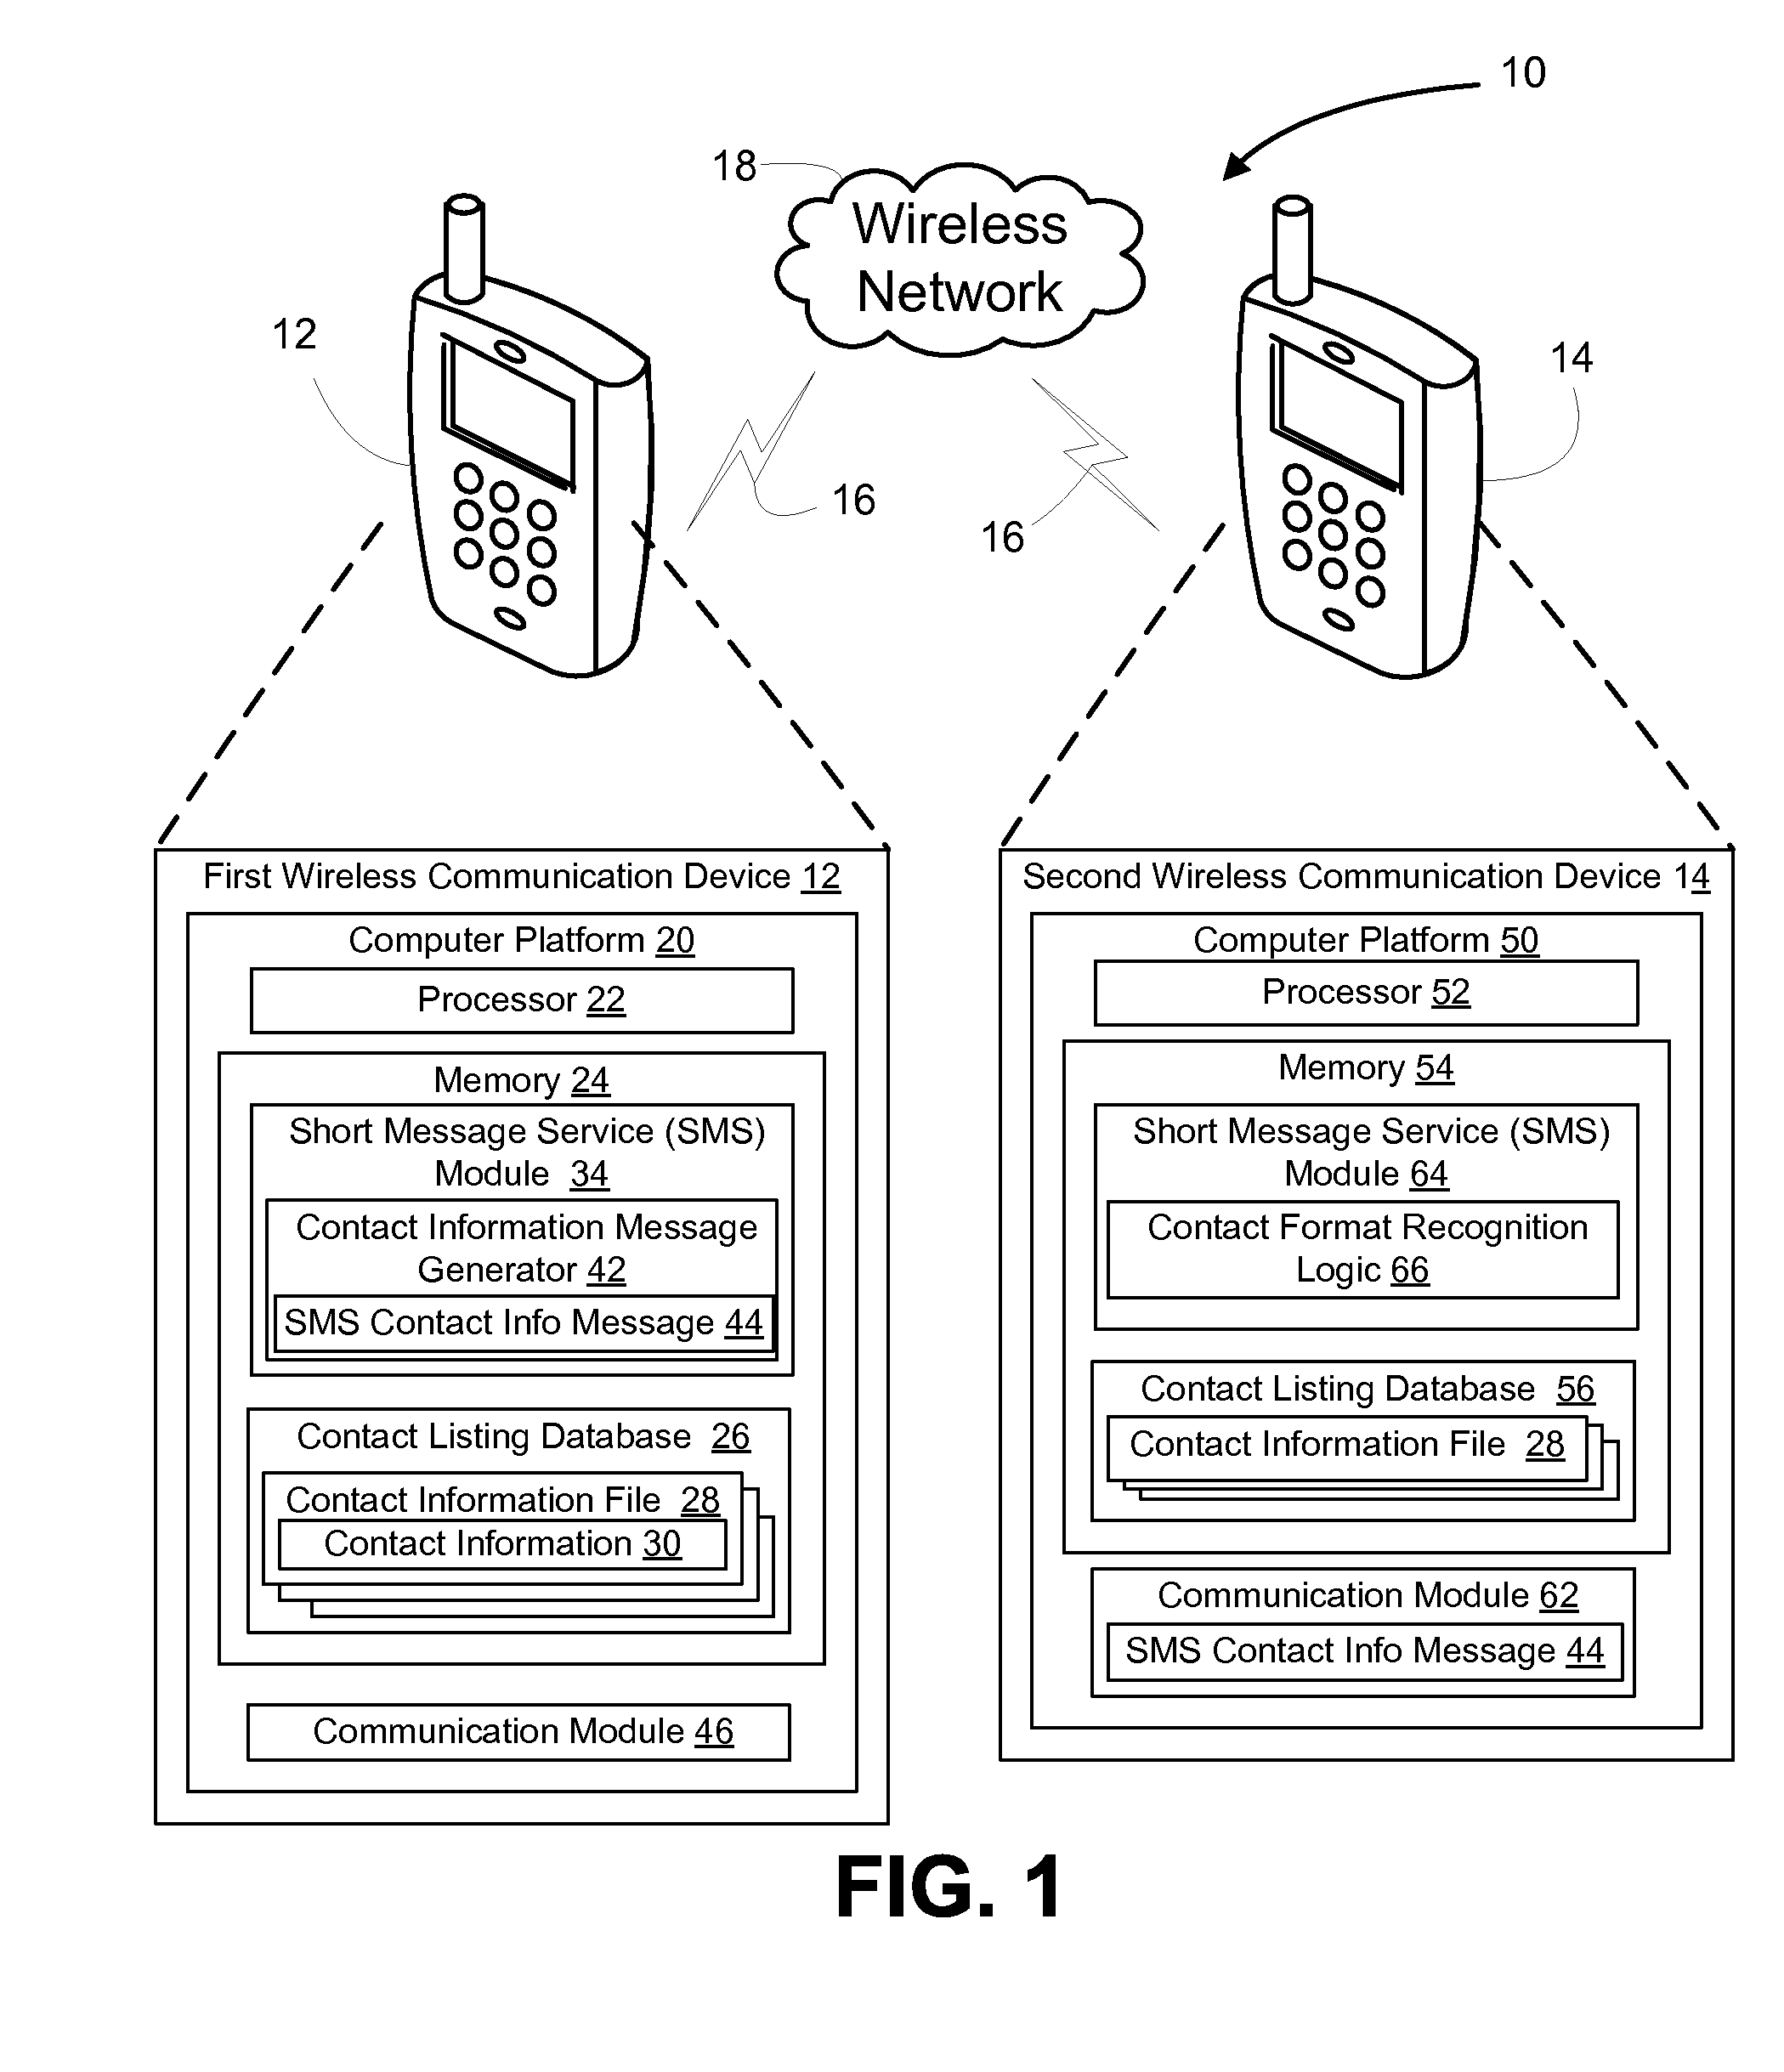 Apparatus and methods of sharing contact information between mobile communication devices using short message service